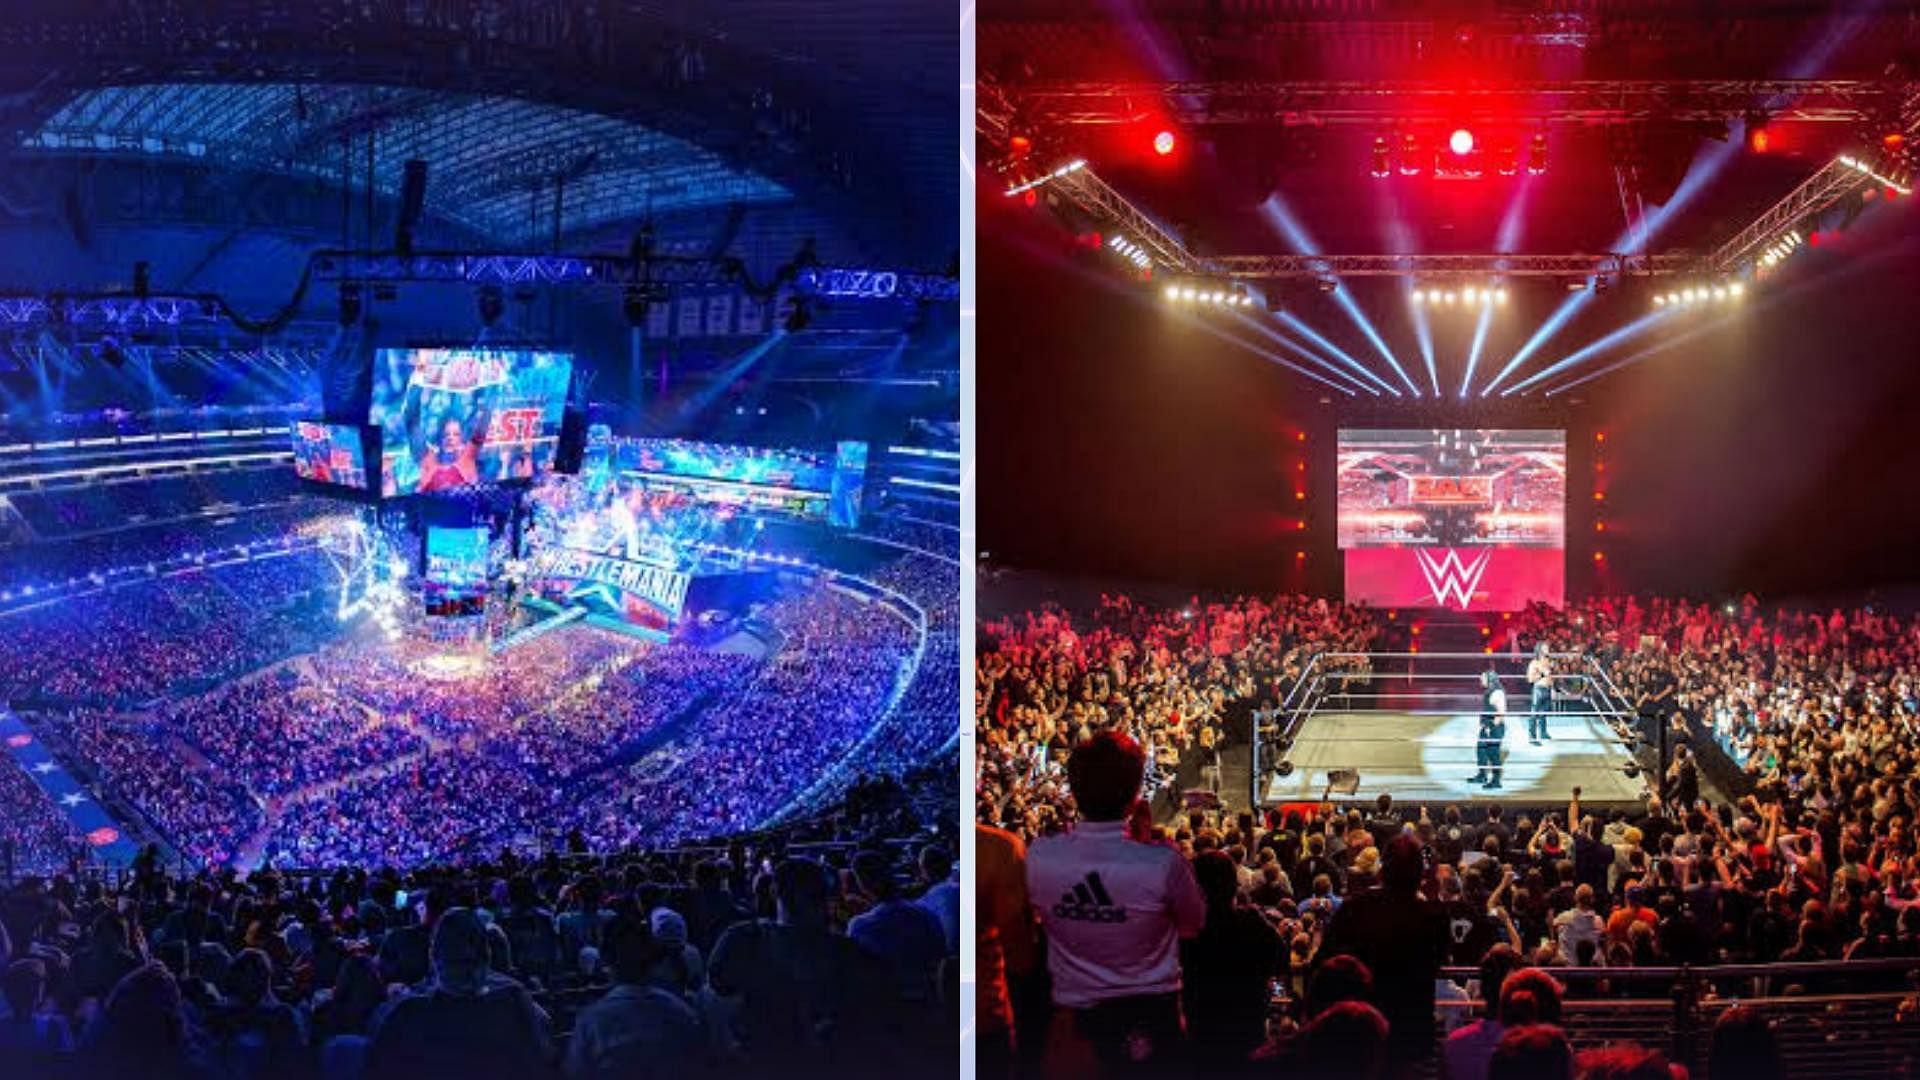 WWE is one of the biggest Wrestling promotion